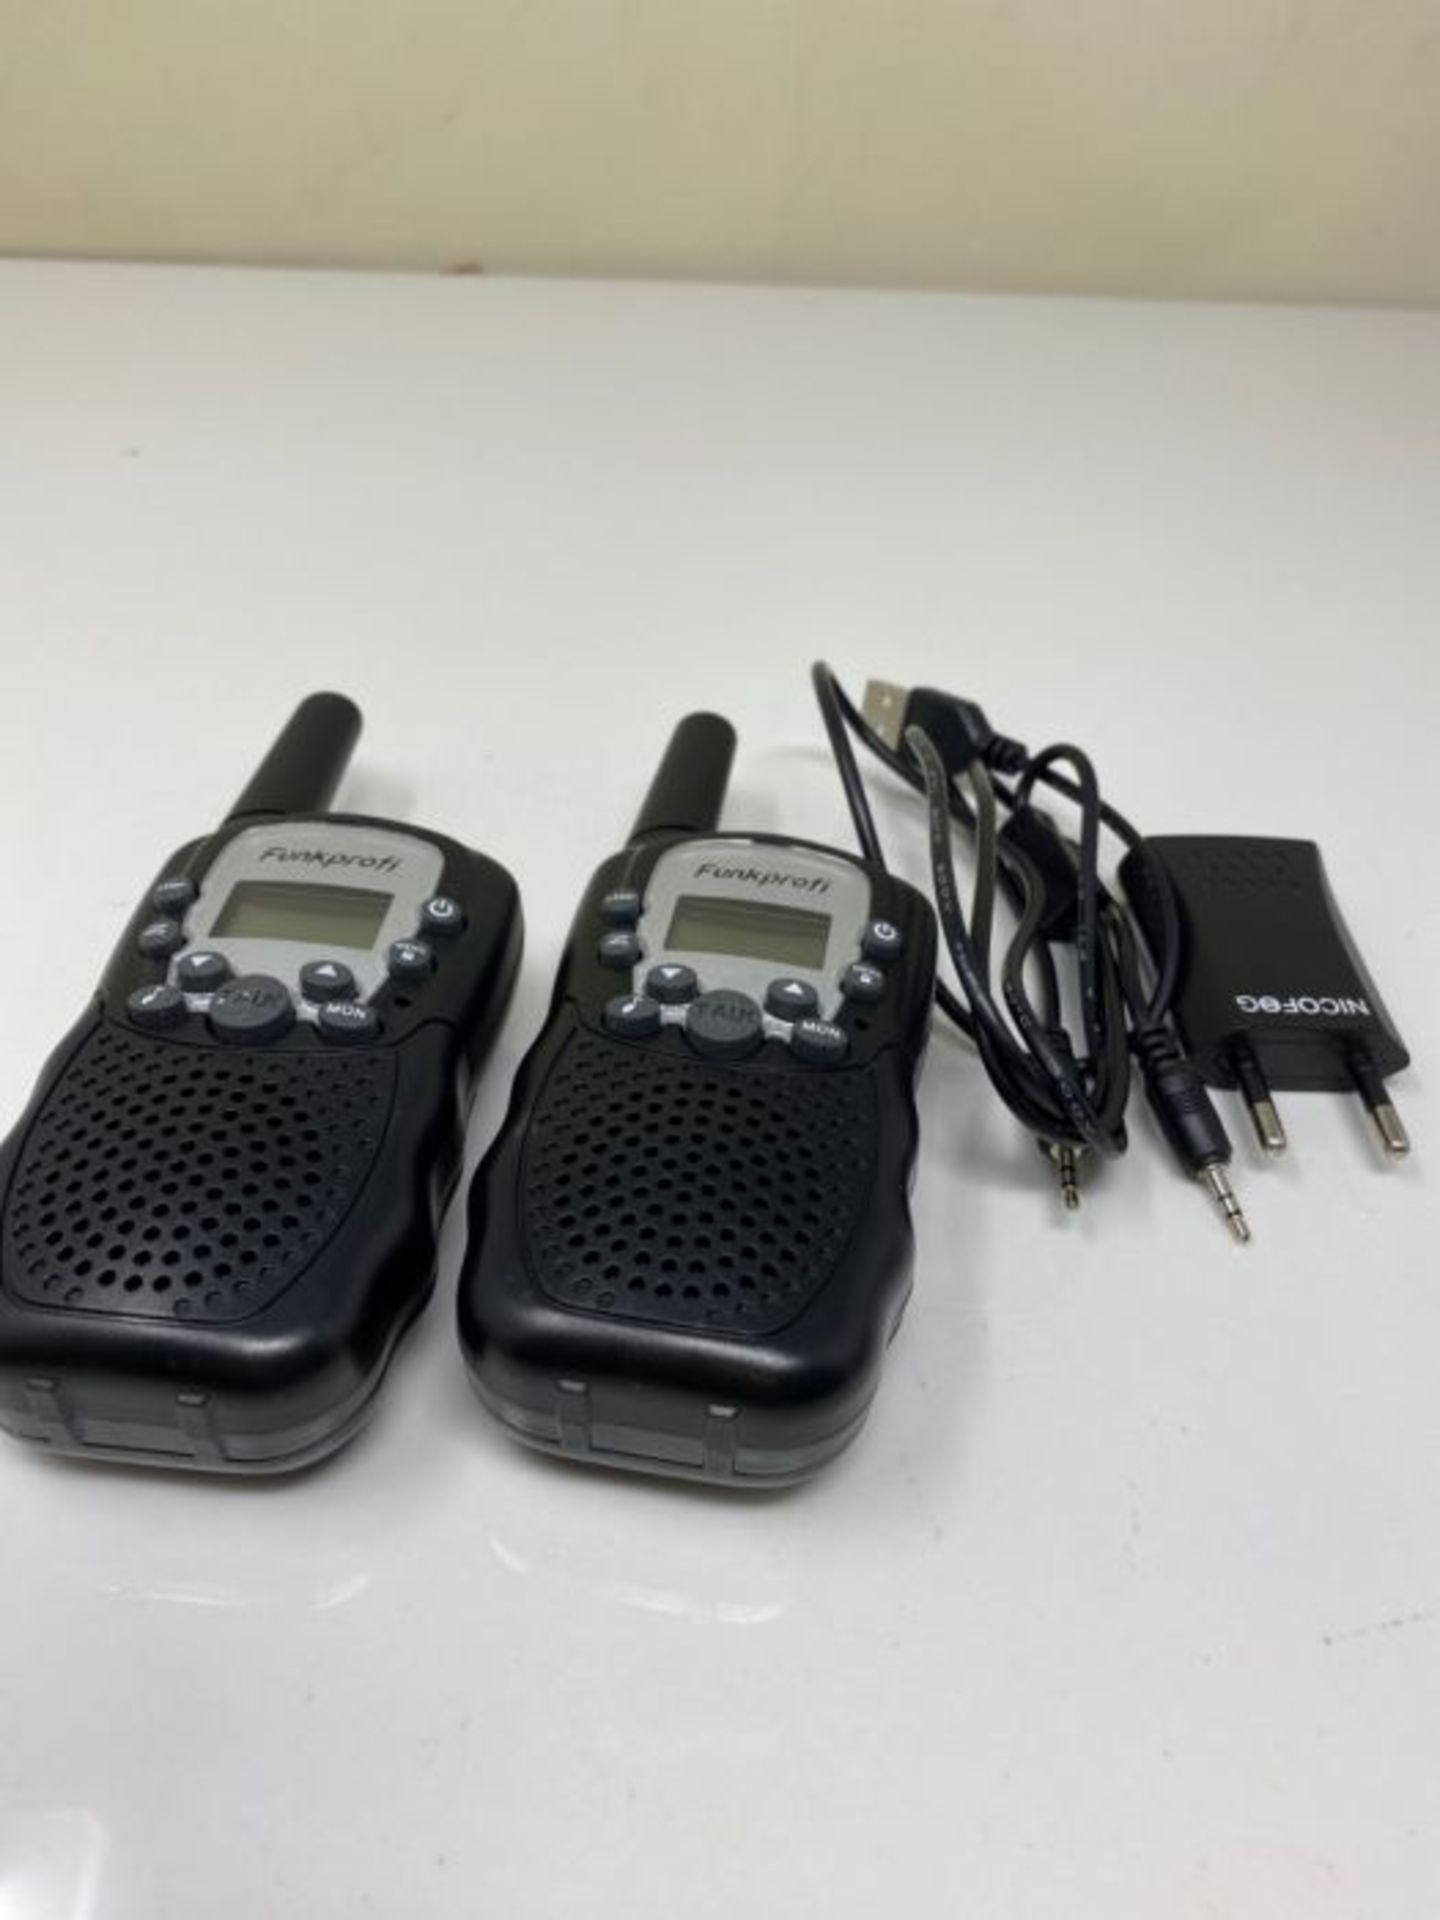 Funkprofi 2 x T-388 Walkie Talkie Set for Children Radios PMR 446 with Batteries Charg - Image 2 of 2